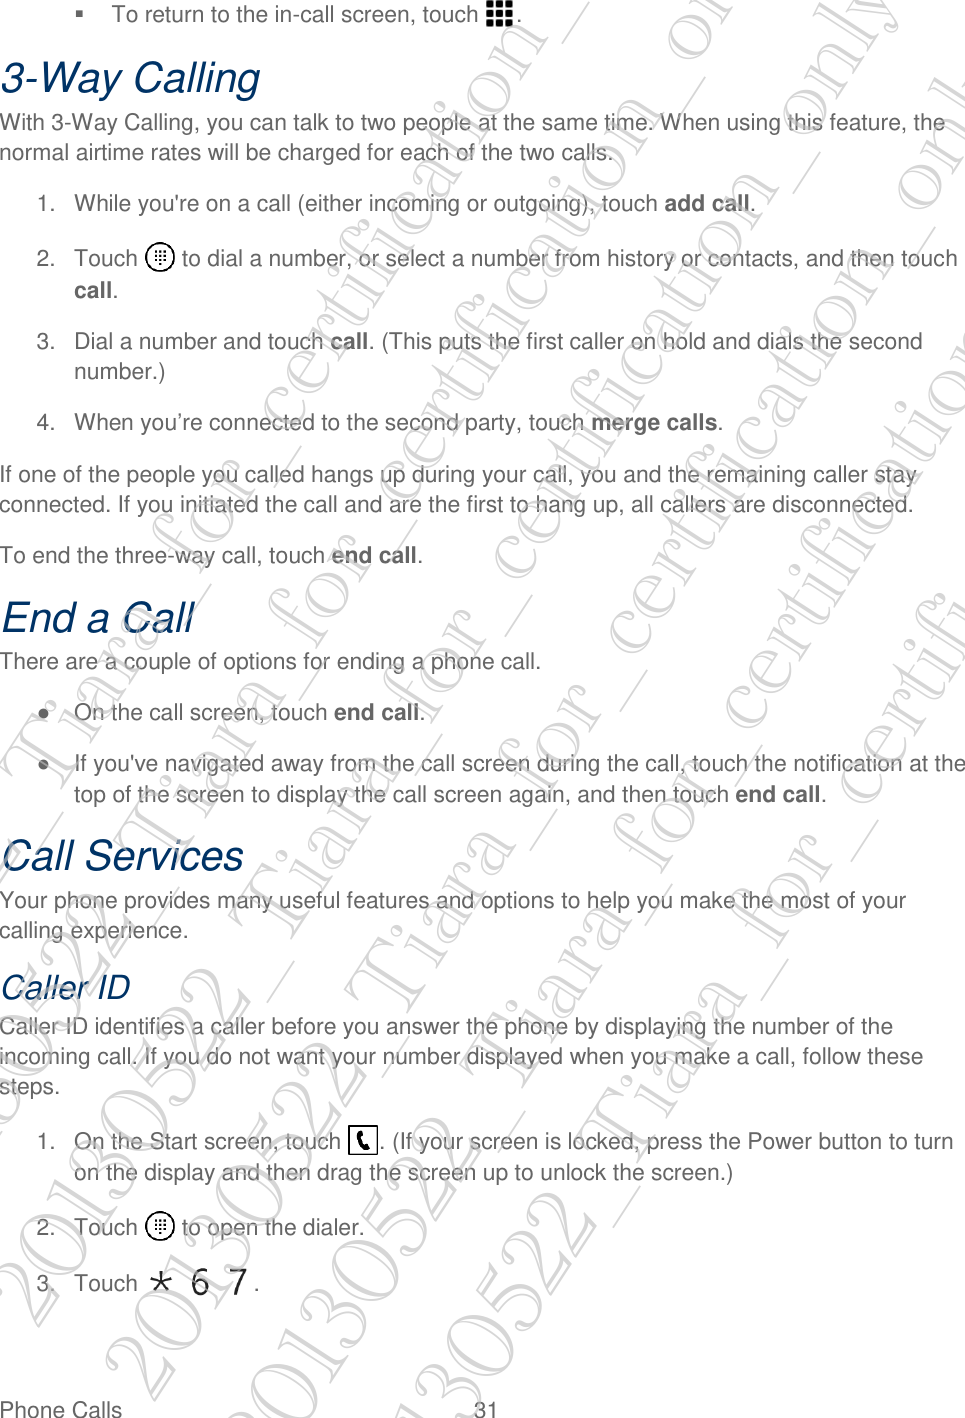  Phone Calls  31   To return to the in-call screen, touch  . 3-Way Calling With 3-Way Calling, you can talk to two people at the same time. When using this feature, the normal airtime rates will be charged for each of the two calls. 1.  While you&apos;re on a call (either incoming or outgoing), touch add call. 2.  Touch   to dial a number, or select a number from history or contacts, and then touch call. 3.  Dial a number and touch call. (This puts the first caller on hold and dials the second number.) 4.  When you’re connected to the second party, touch merge calls. If one of the people you called hangs up during your call, you and the remaining caller stay connected. If you initiated the call and are the first to hang up, all callers are disconnected. To end the three-way call, touch end call. End a Call There are a couple of options for ending a phone call. ●  On the call screen, touch end call. ●  If you&apos;ve navigated away from the call screen during the call, touch the notification at the top of the screen to display the call screen again, and then touch end call. Call Services Your phone provides many useful features and options to help you make the most of your calling experience. Caller ID Caller ID identifies a caller before you answer the phone by displaying the number of the incoming call. If you do not want your number displayed when you make a call, follow these steps. 1.  On the Start screen, touch  . (If your screen is locked, press the Power button to turn on the display and then drag the screen up to unlock the screen.) 2.  Touch   to open the dialer. 3.  Touch      . 20130522_Tiara_for_certification_only 20130522_Tiara_for_certification_only 20130522_Tiara_for_certification_only 20130522_Tiara_for_certification_only 20130522_Tiara_for_certification_only 20130522_Tiara_for_certification_only